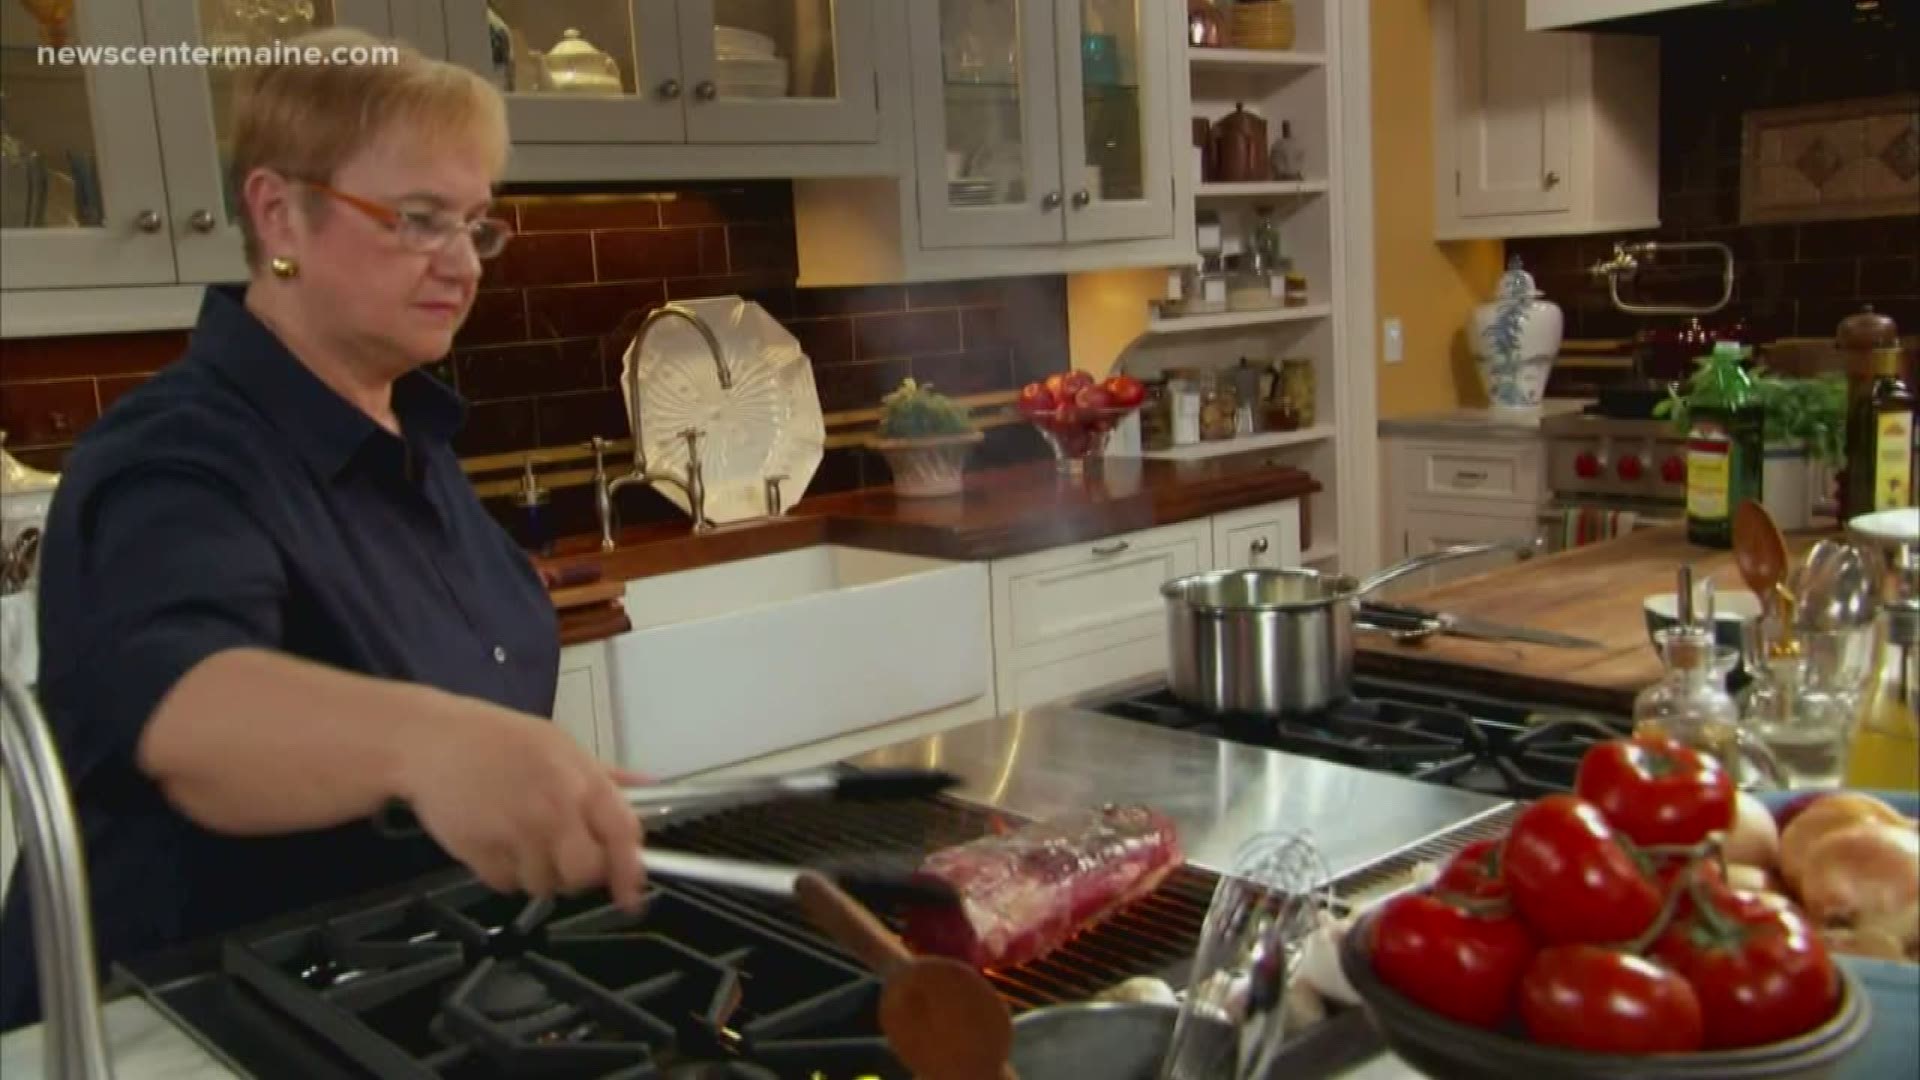 Television chef Lidia Bastianich tells her story in her memoir, "My American Dream: A Life of Love, Family, and Food."